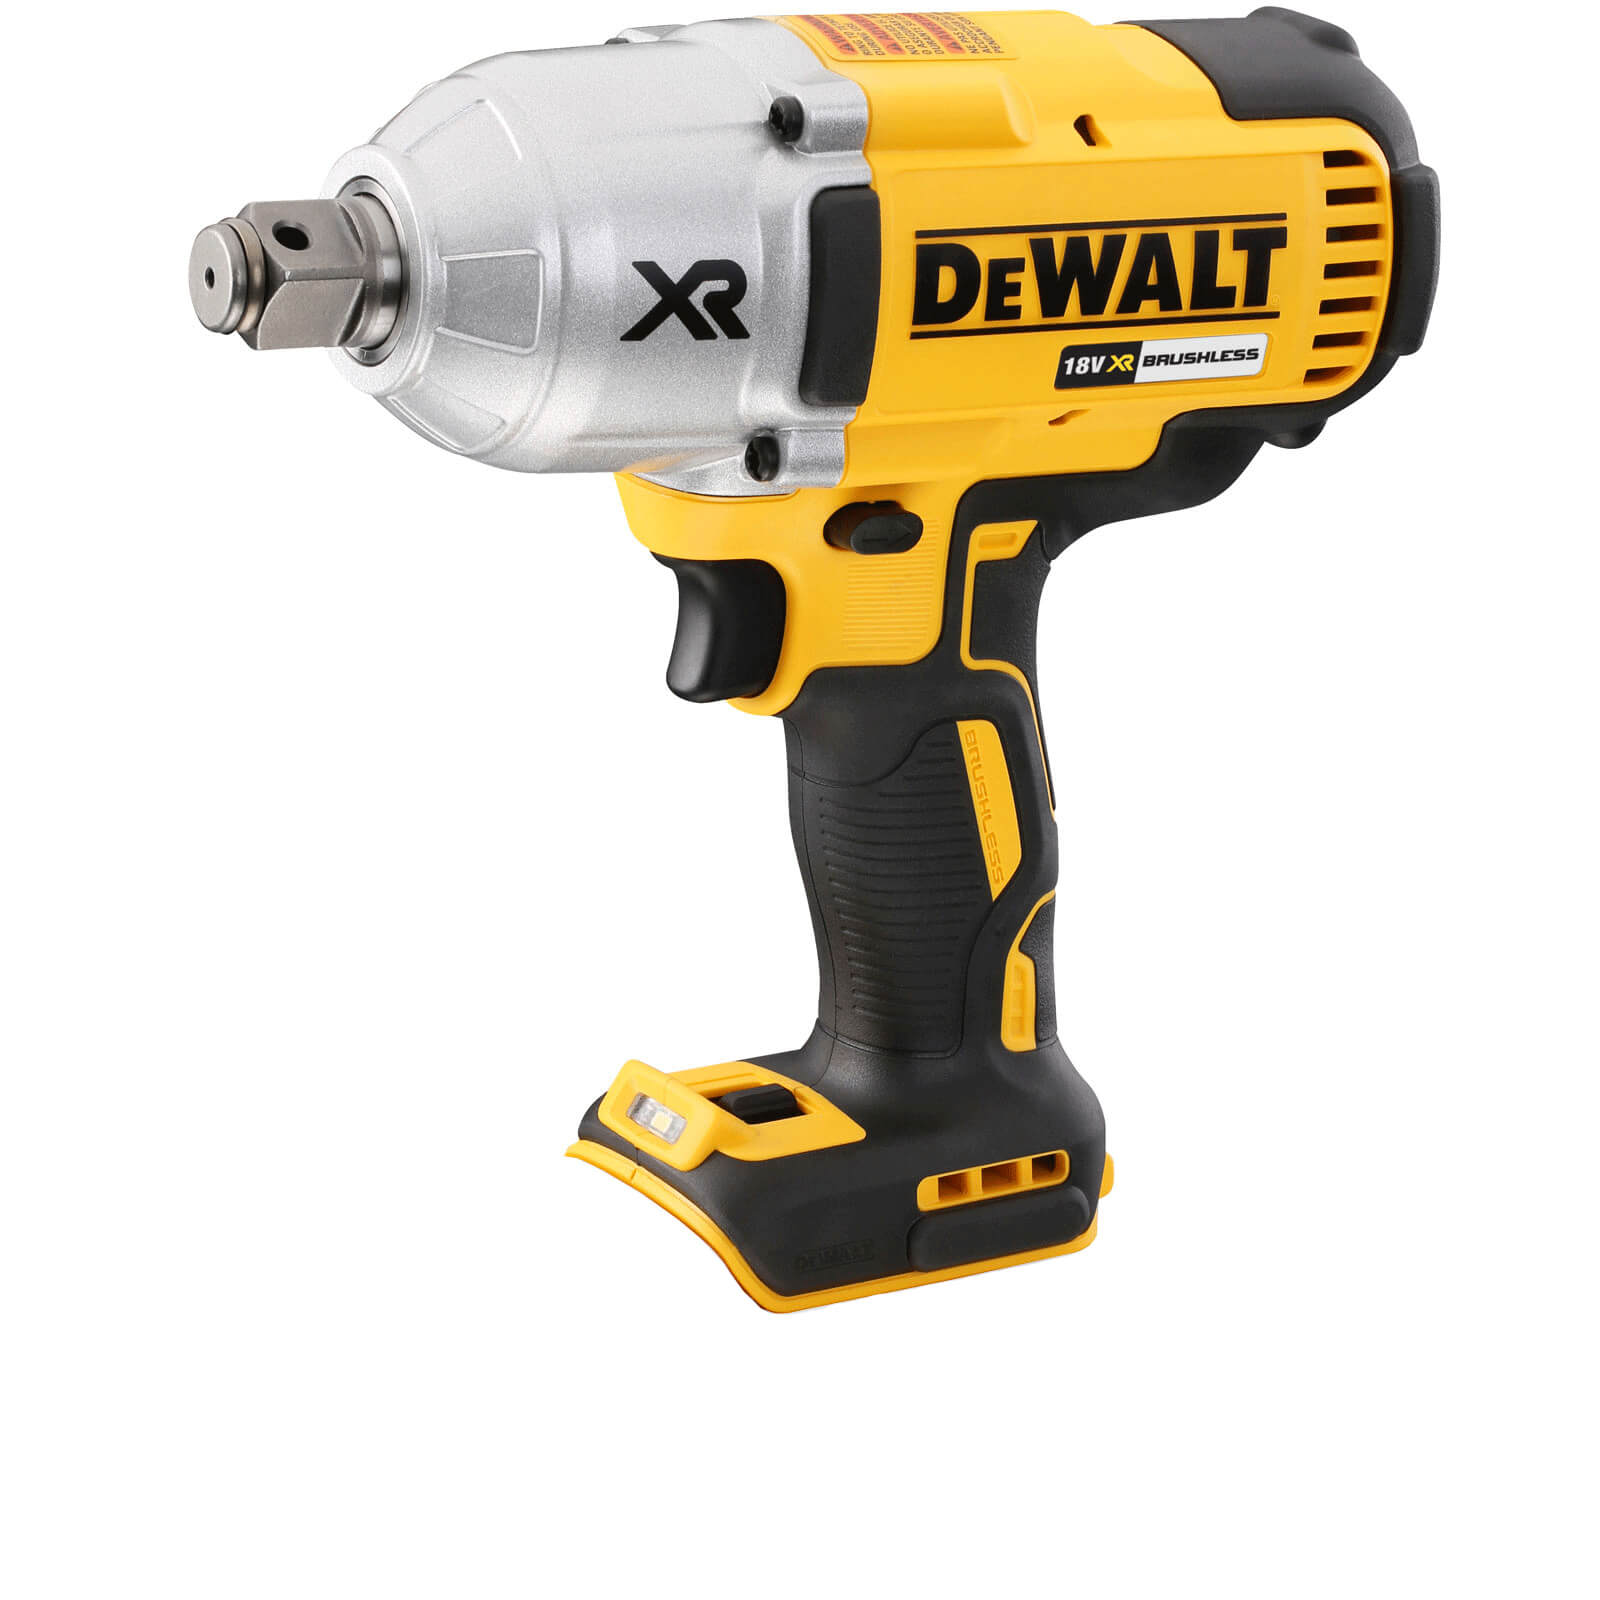 DeWalt DCF897 18v XR Cordless Brushless 3/4" Drive Impact Wrench No Batteries No Charger No Case